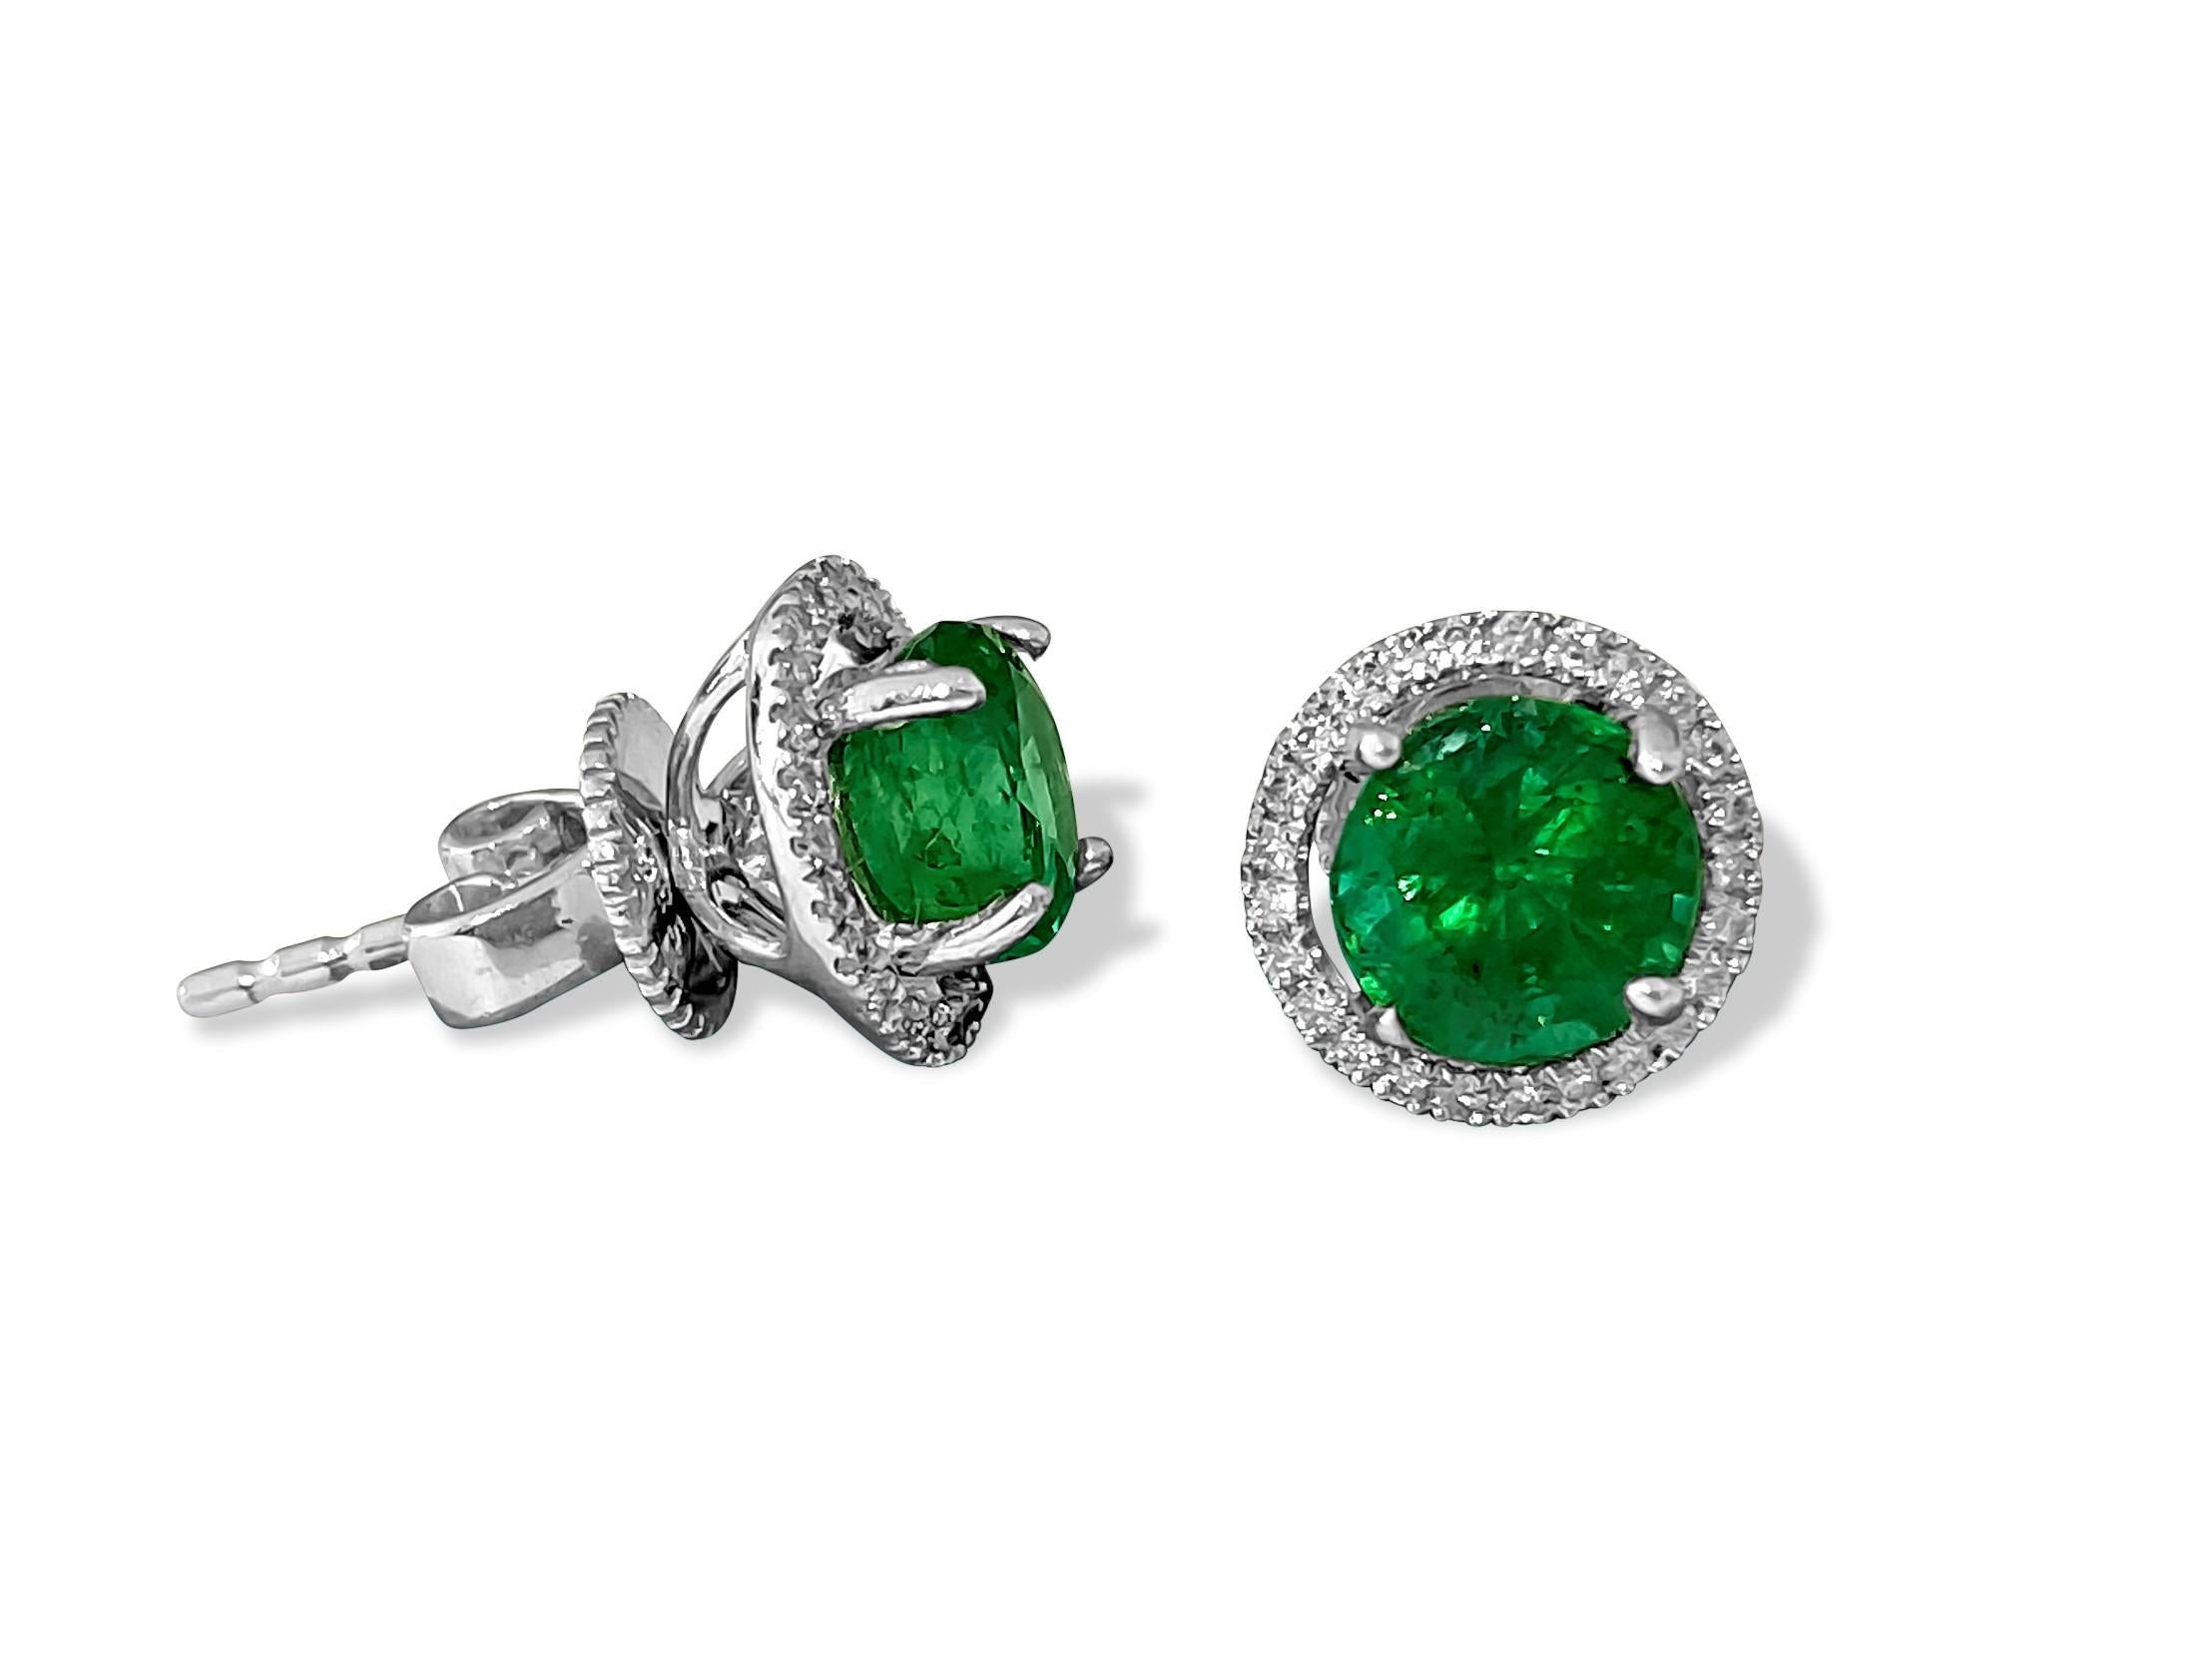 Metal: 14k white gold. 
Diamonds: 0.50 carats total, G color and VS clarity. Round brilliant cut diamonds set in prongs.

Emerald weight: 2.00 carats total. Round shape set in prongs. 100% natural earth mined precious stones.

Push back studs. An